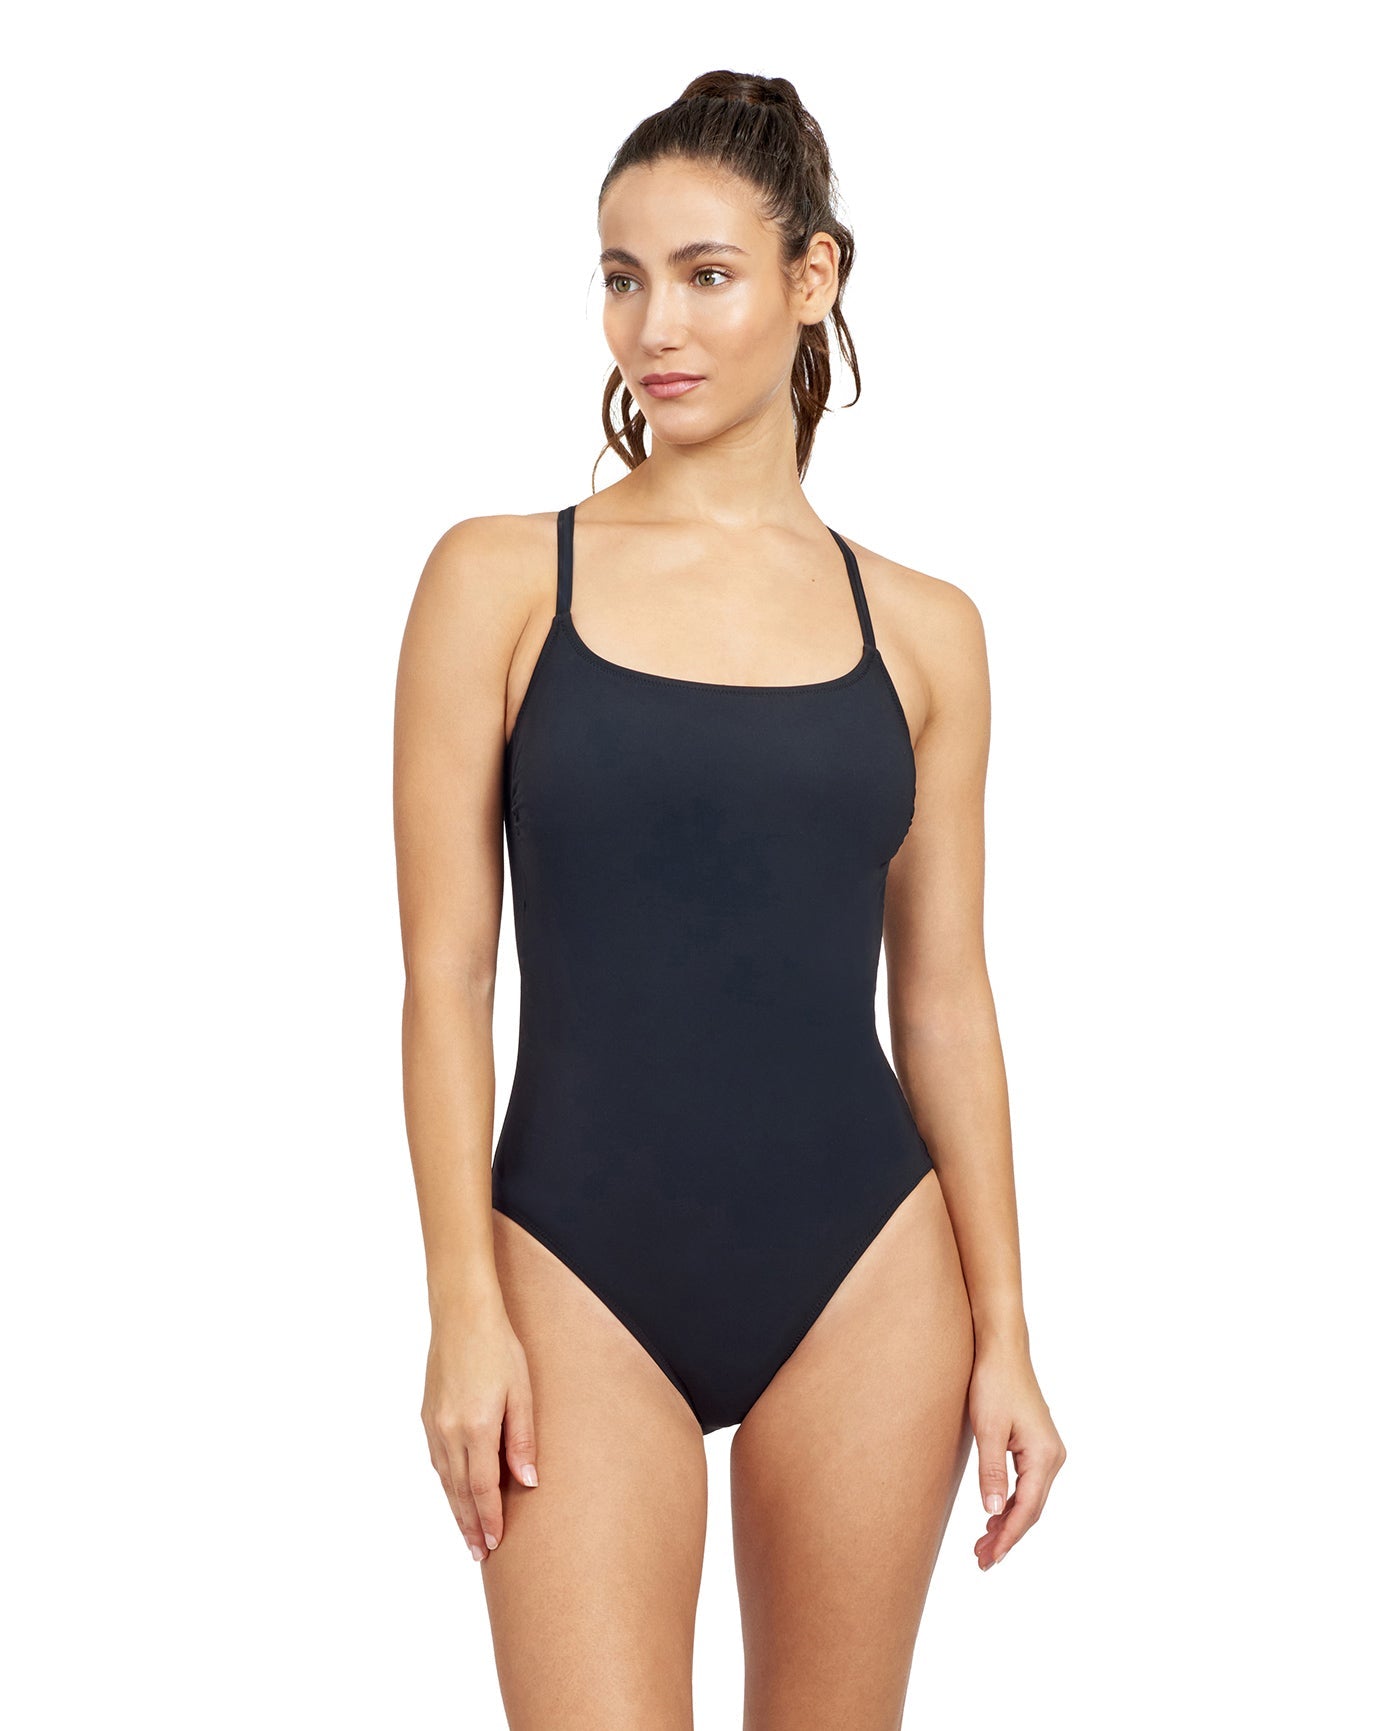 Front View Of Free Sport Free Round Neck Strappy One Piece Swimsuit | FREE SPORT FREE BLACK